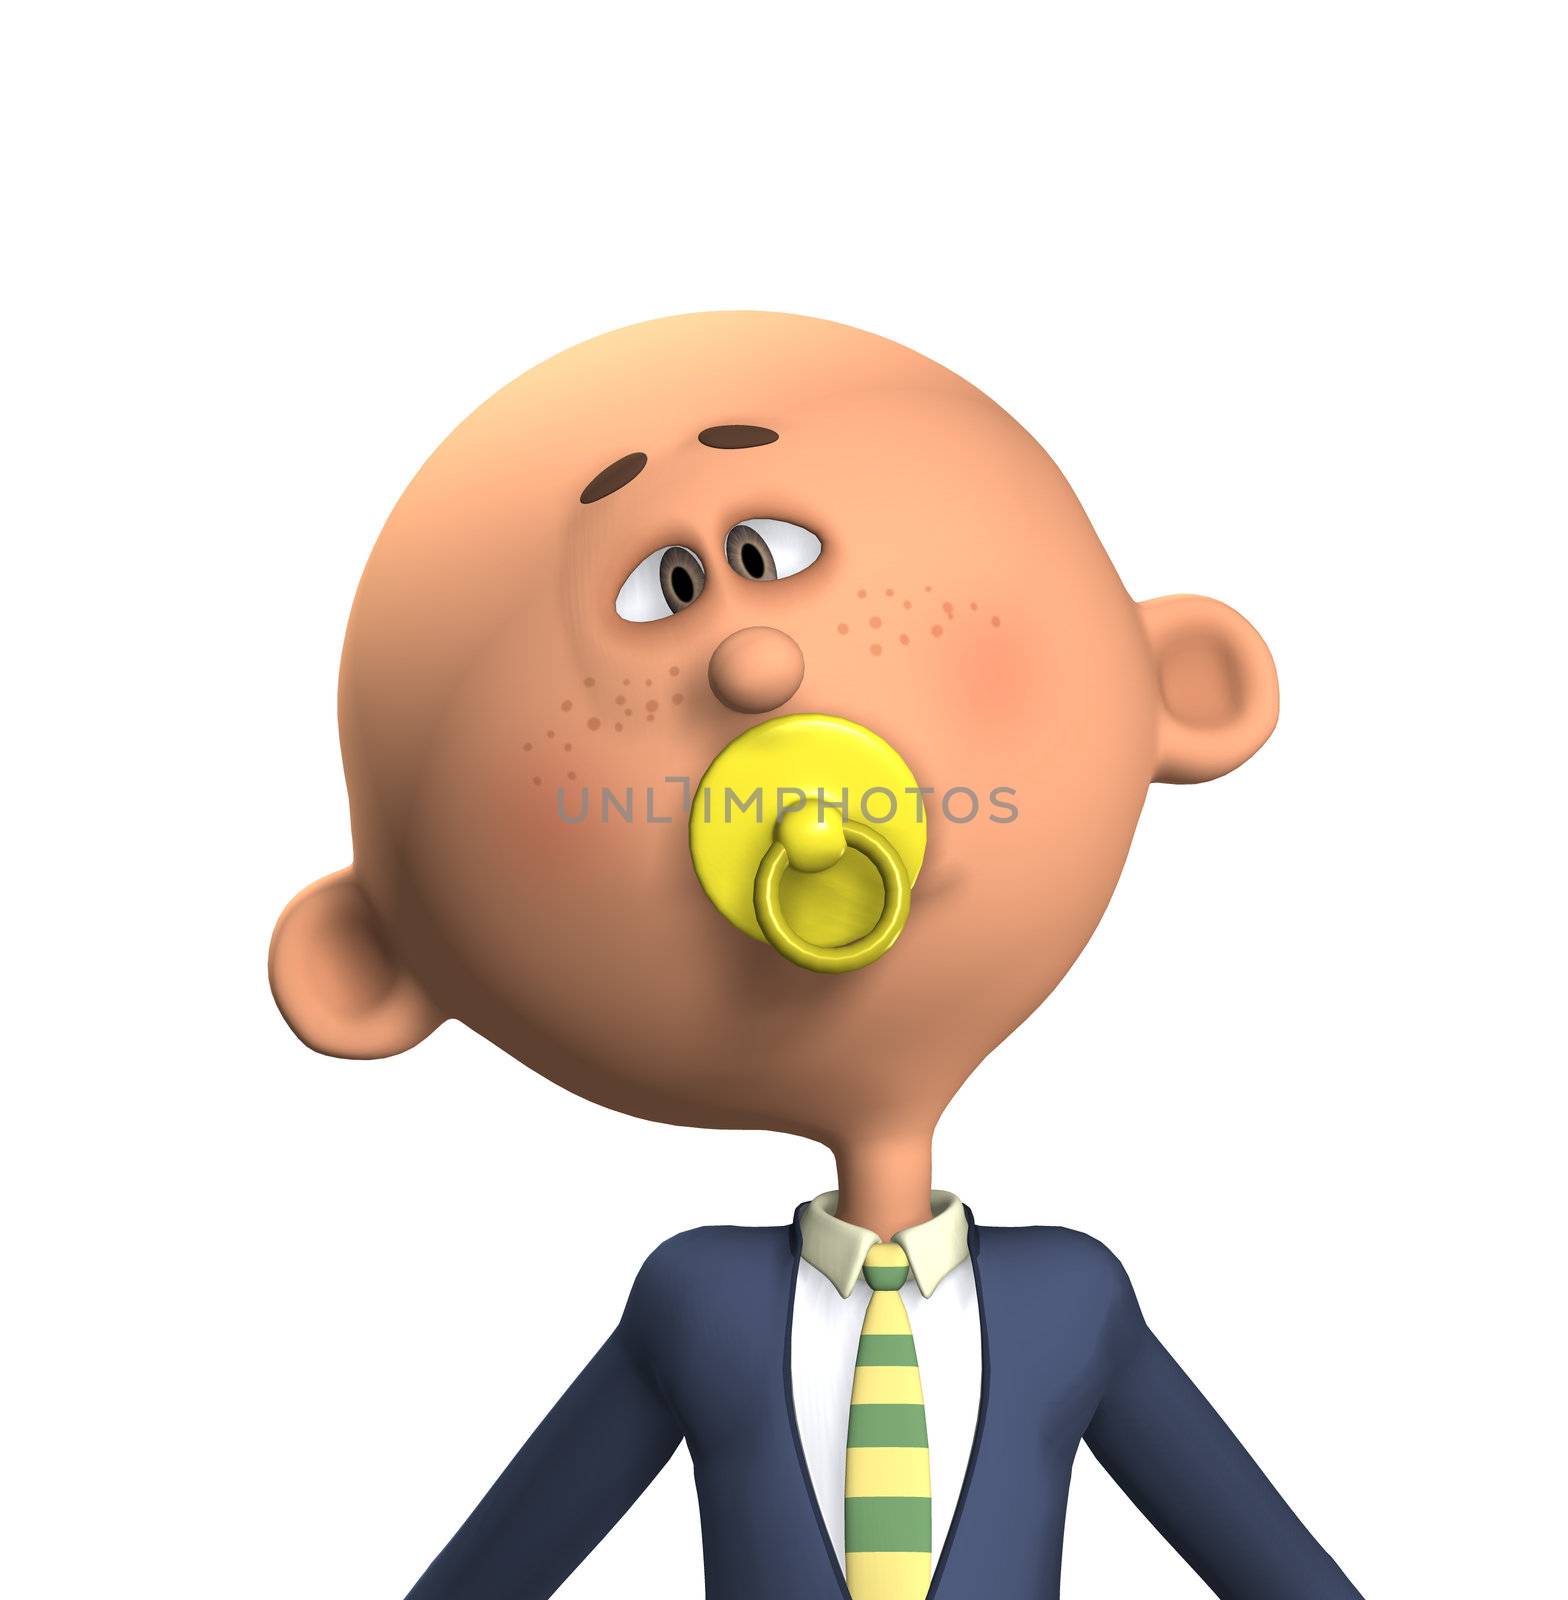 Humorous concept image showing a  business man sucking on a babies dummy.
